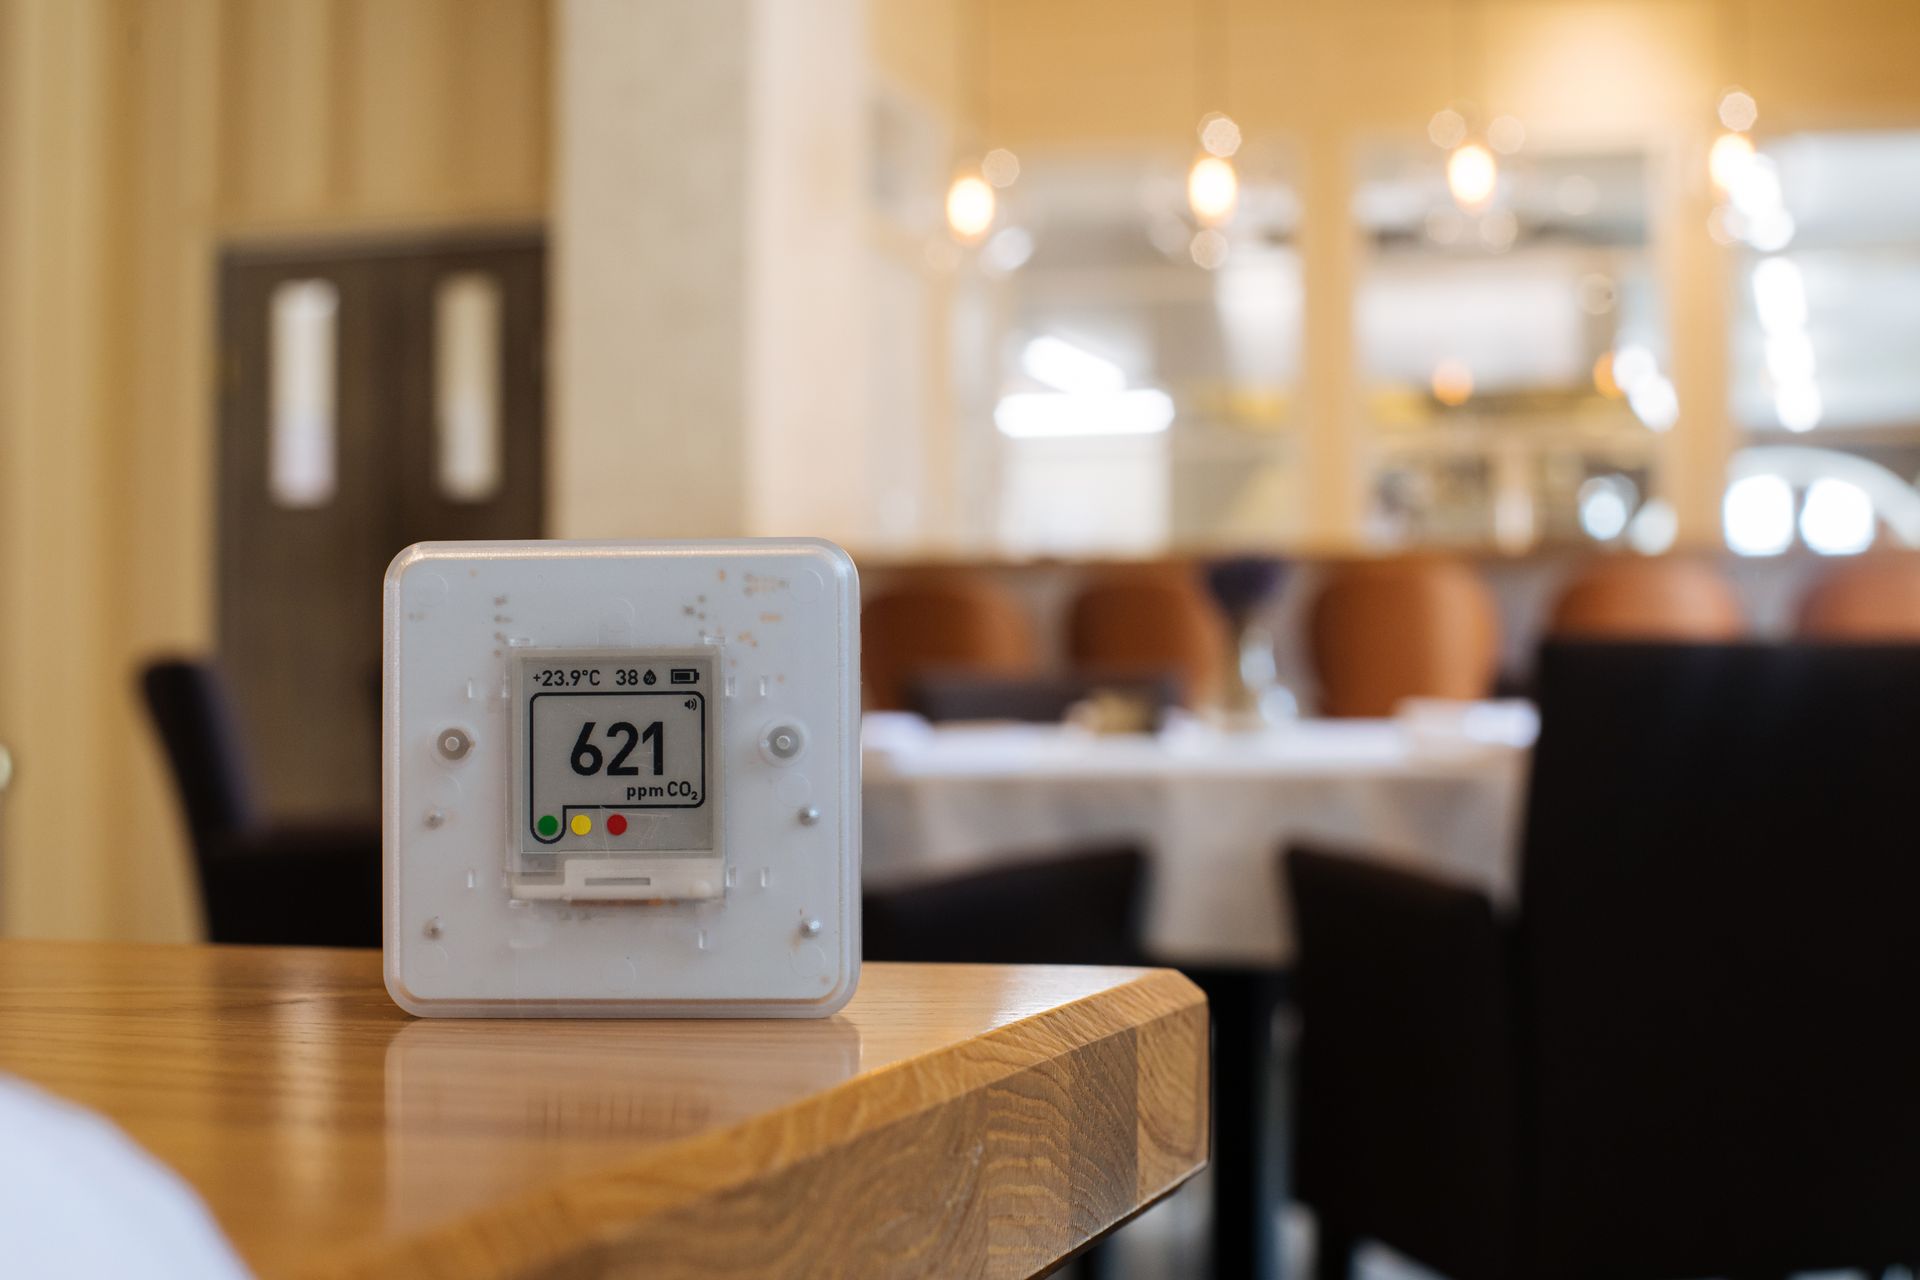 A thermostat is sitting on a wooden table in a restaurant.